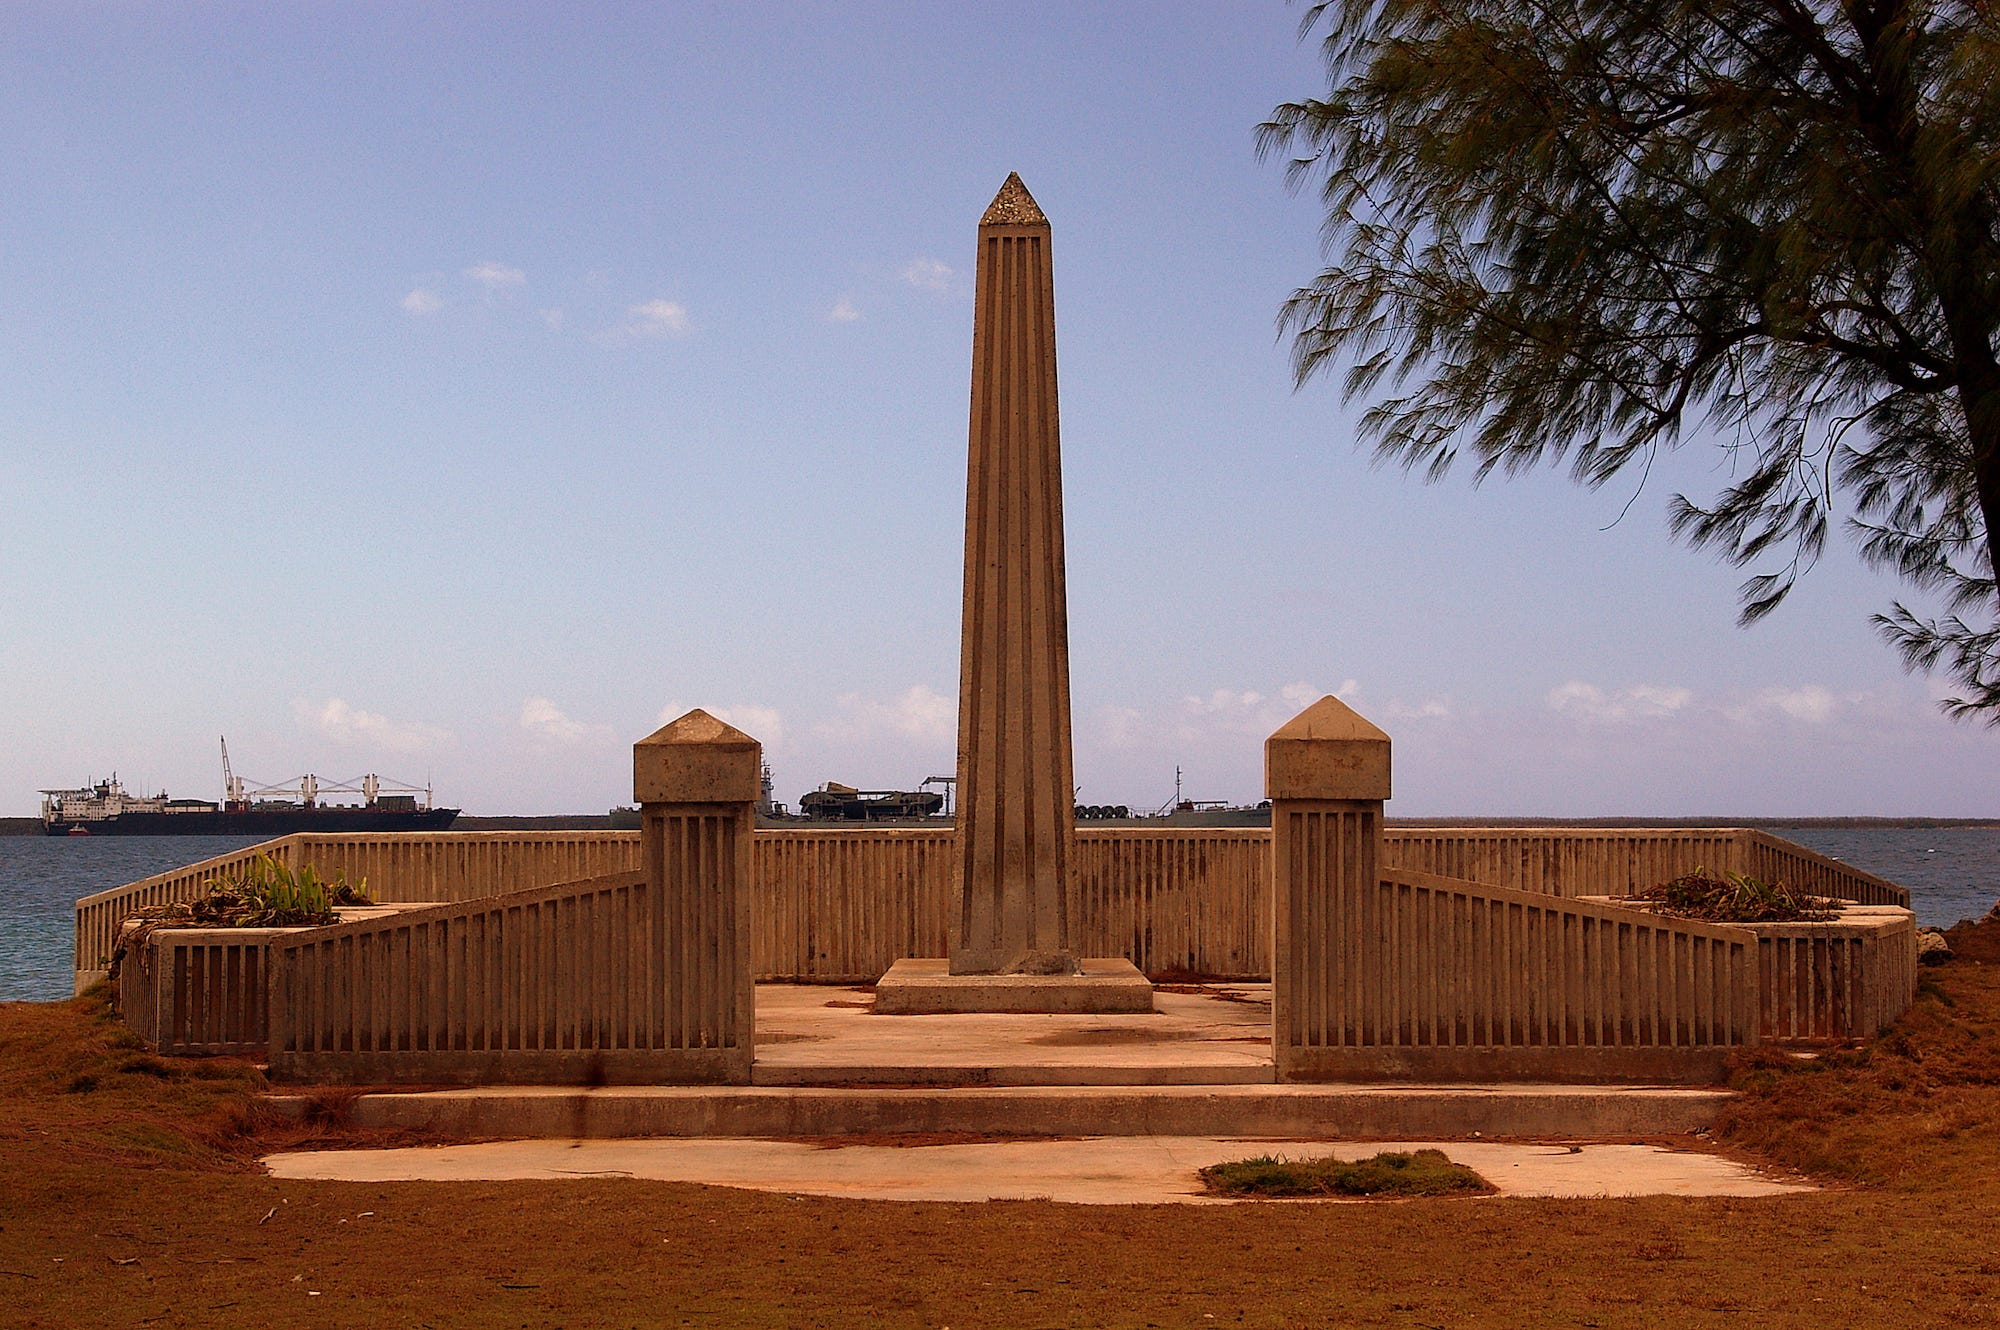 The Capt. Henry Glass monument on Guam